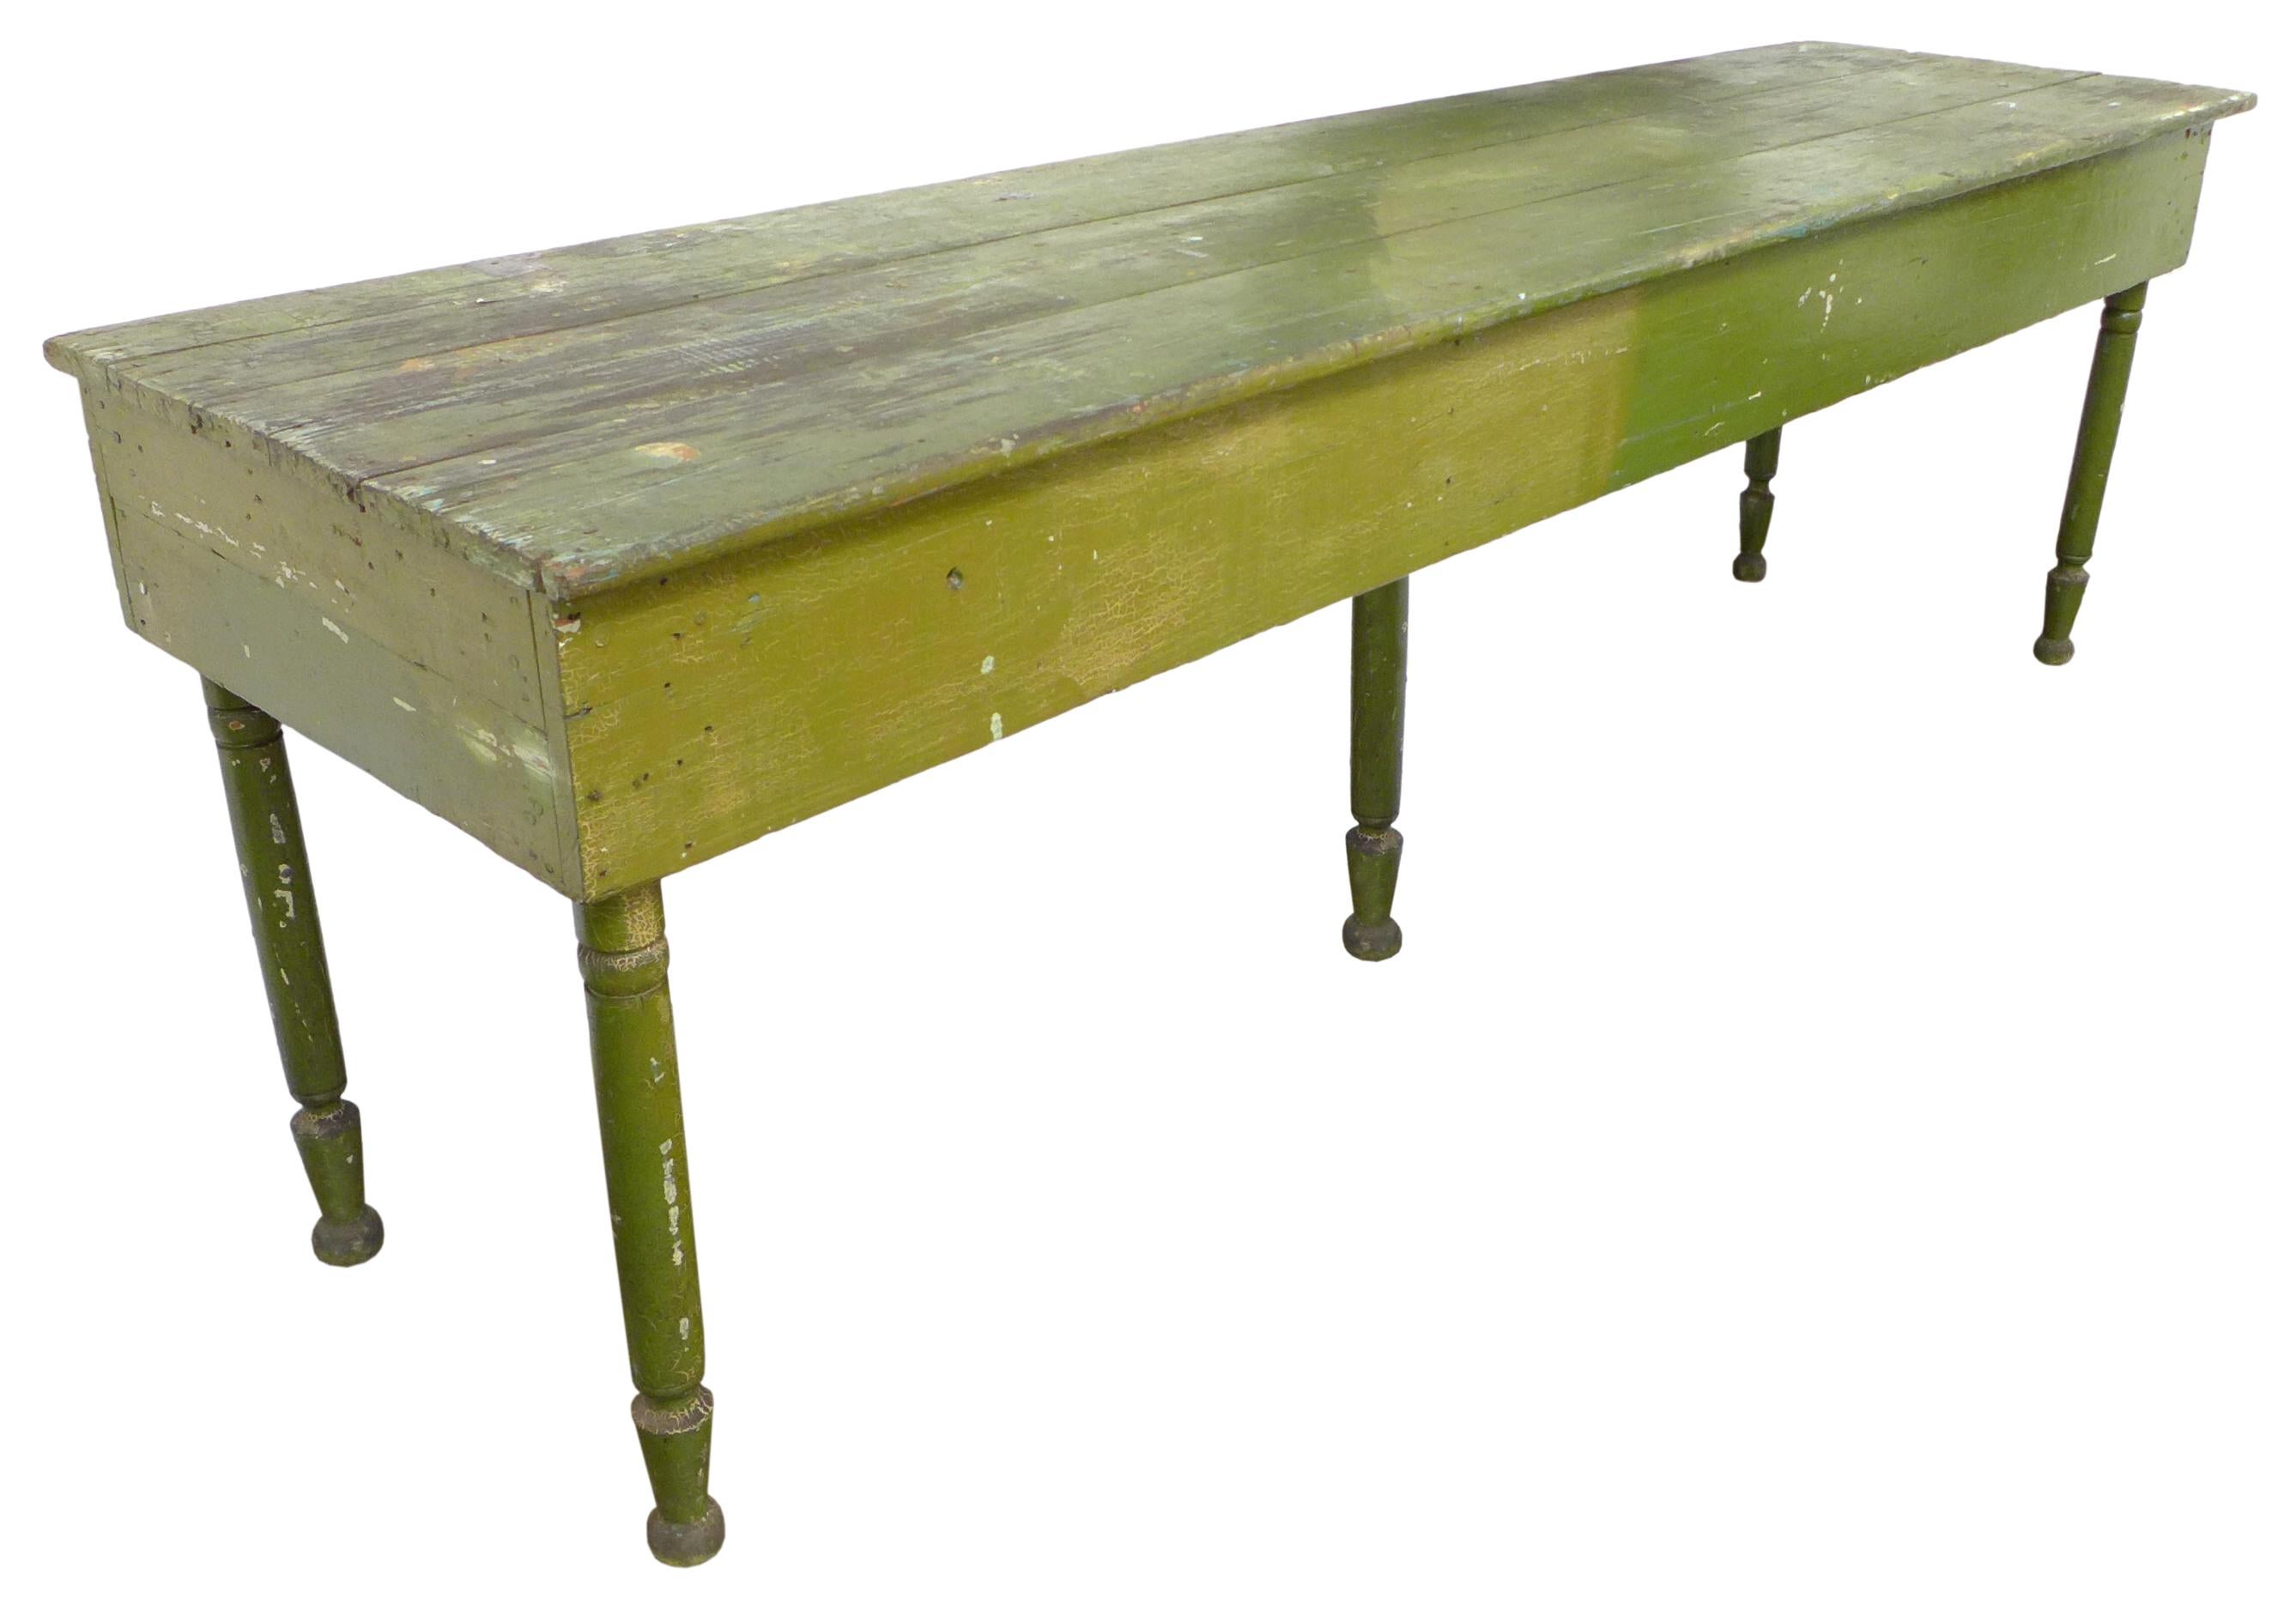 A wonderful and unusual, rustic 5-legged painted wood console or work table. Great extra long scale and gradient green surface beautifully worn from years of use. Remains structurally strong and functional. A rare and evocative vintage Americana